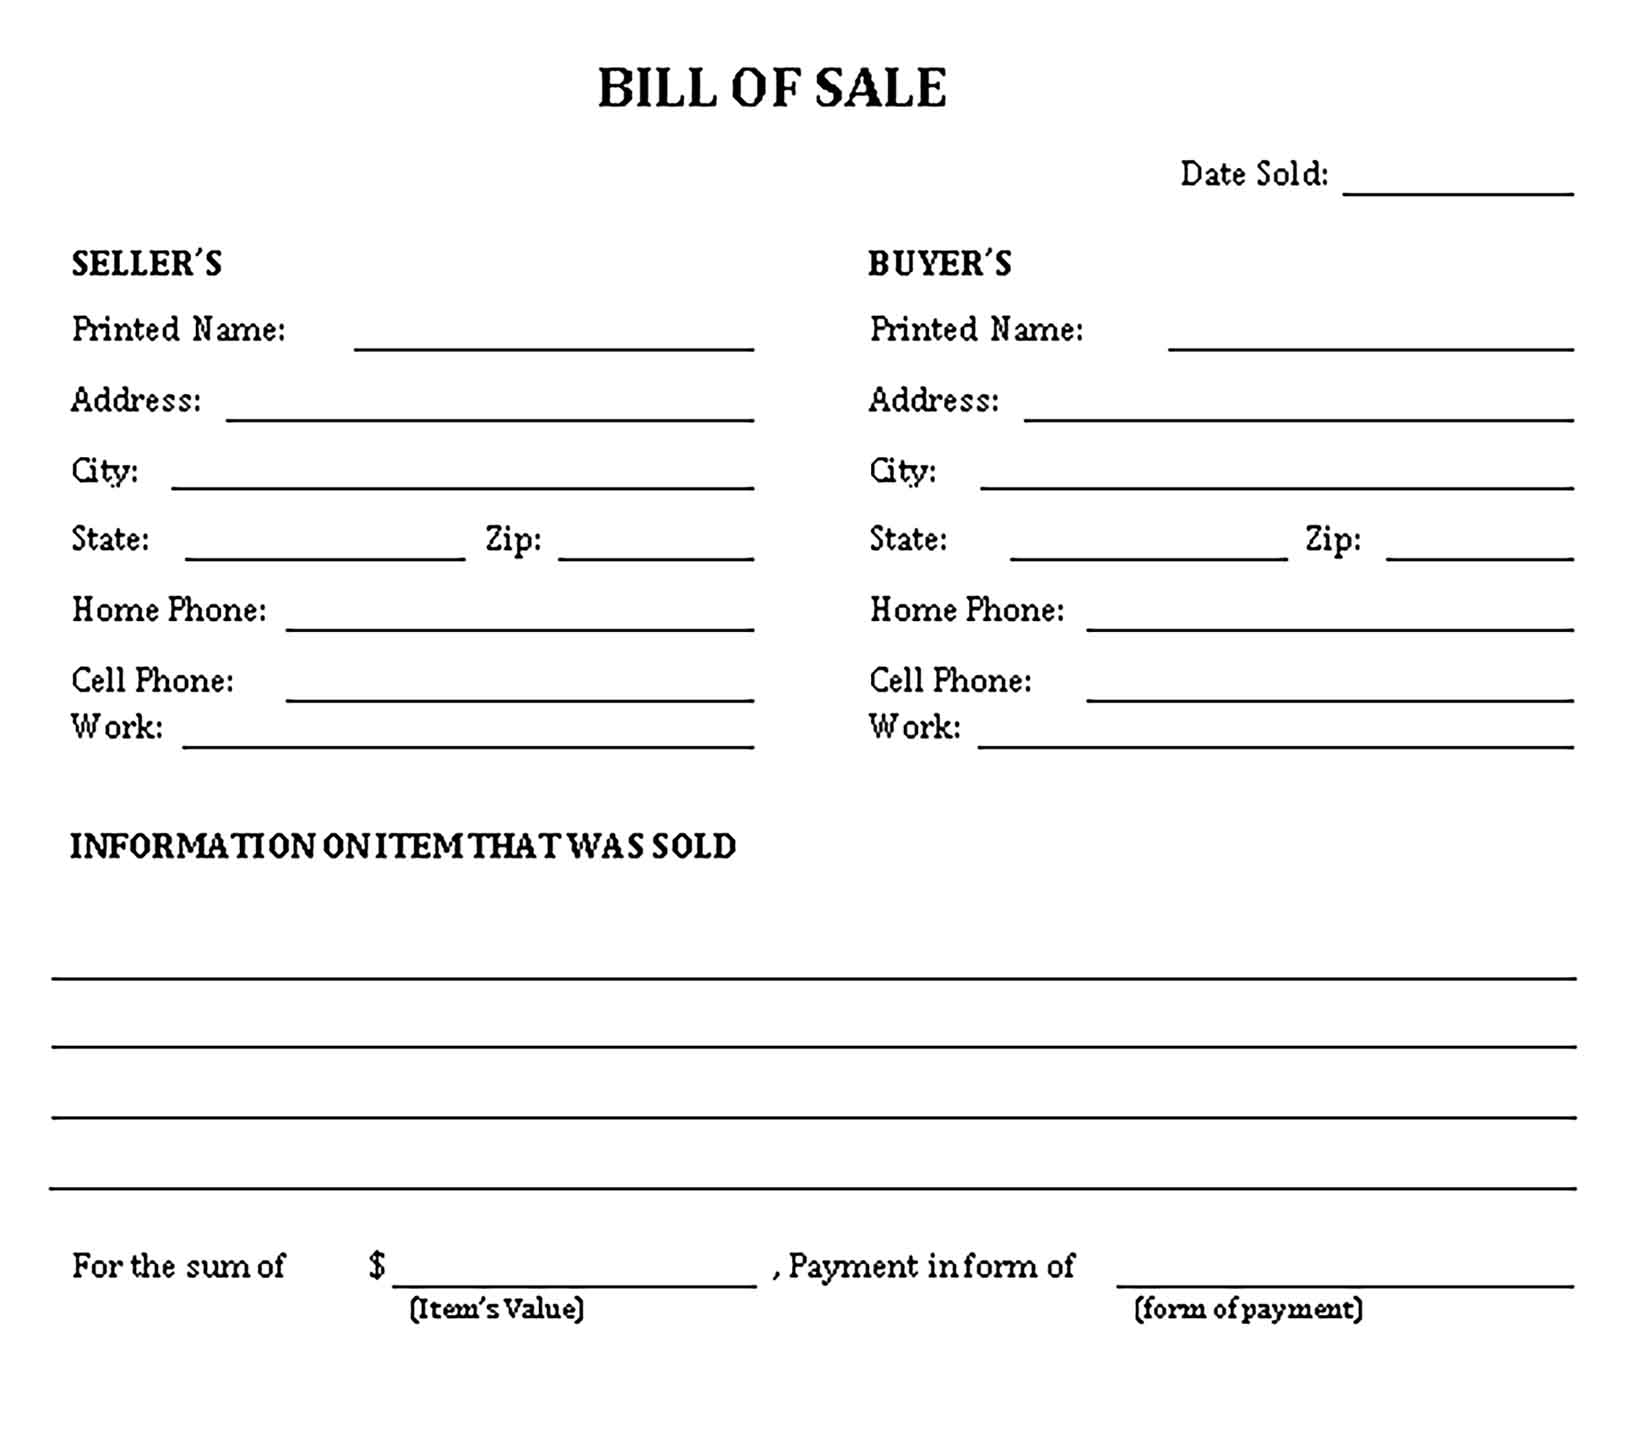 Sample general bill of sale form Templates